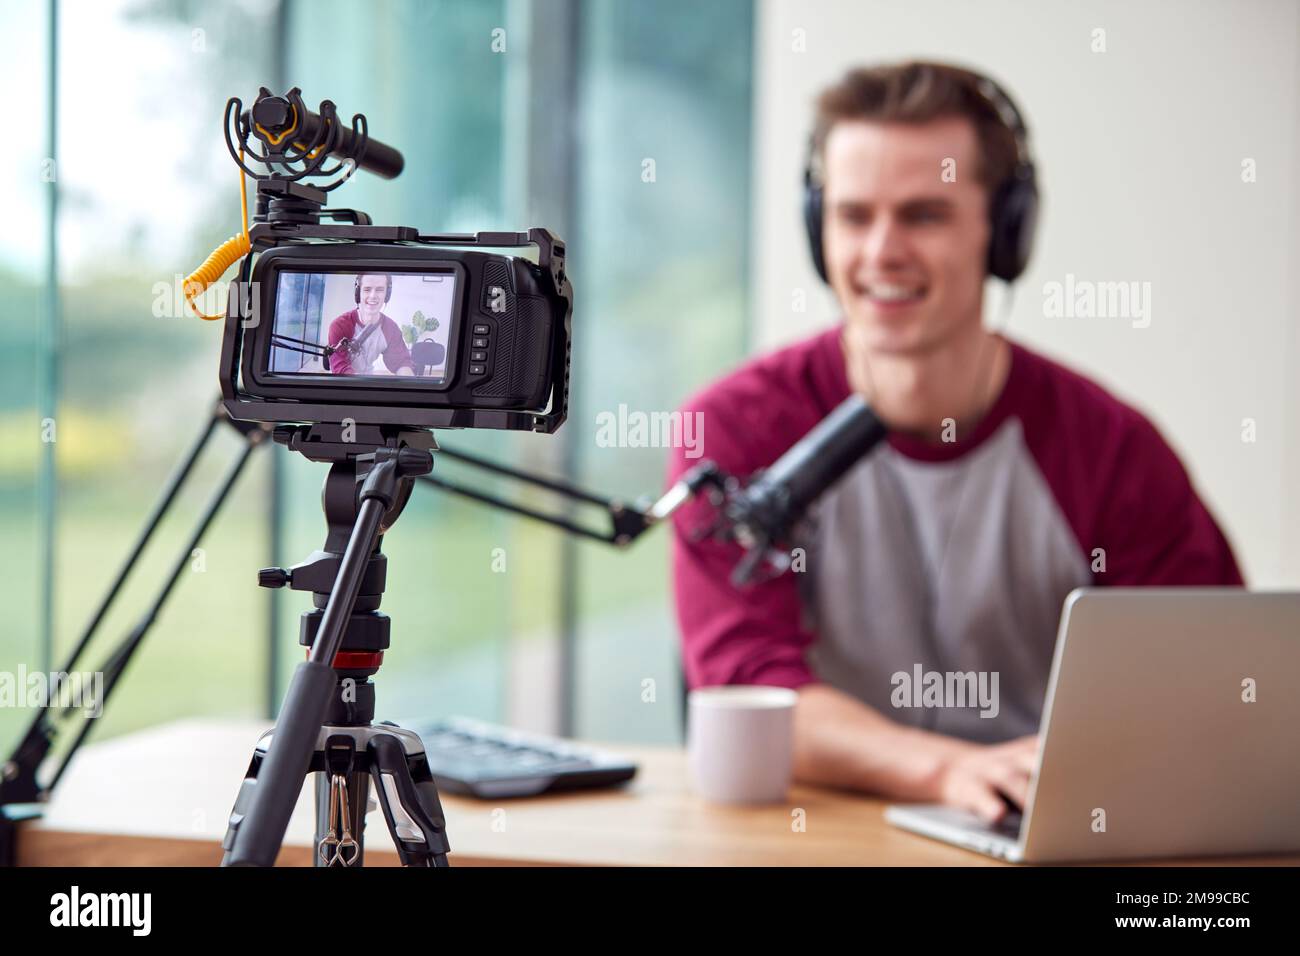 Male Vlogger With Laptop Recording Video At Home With Camera Stock Photo